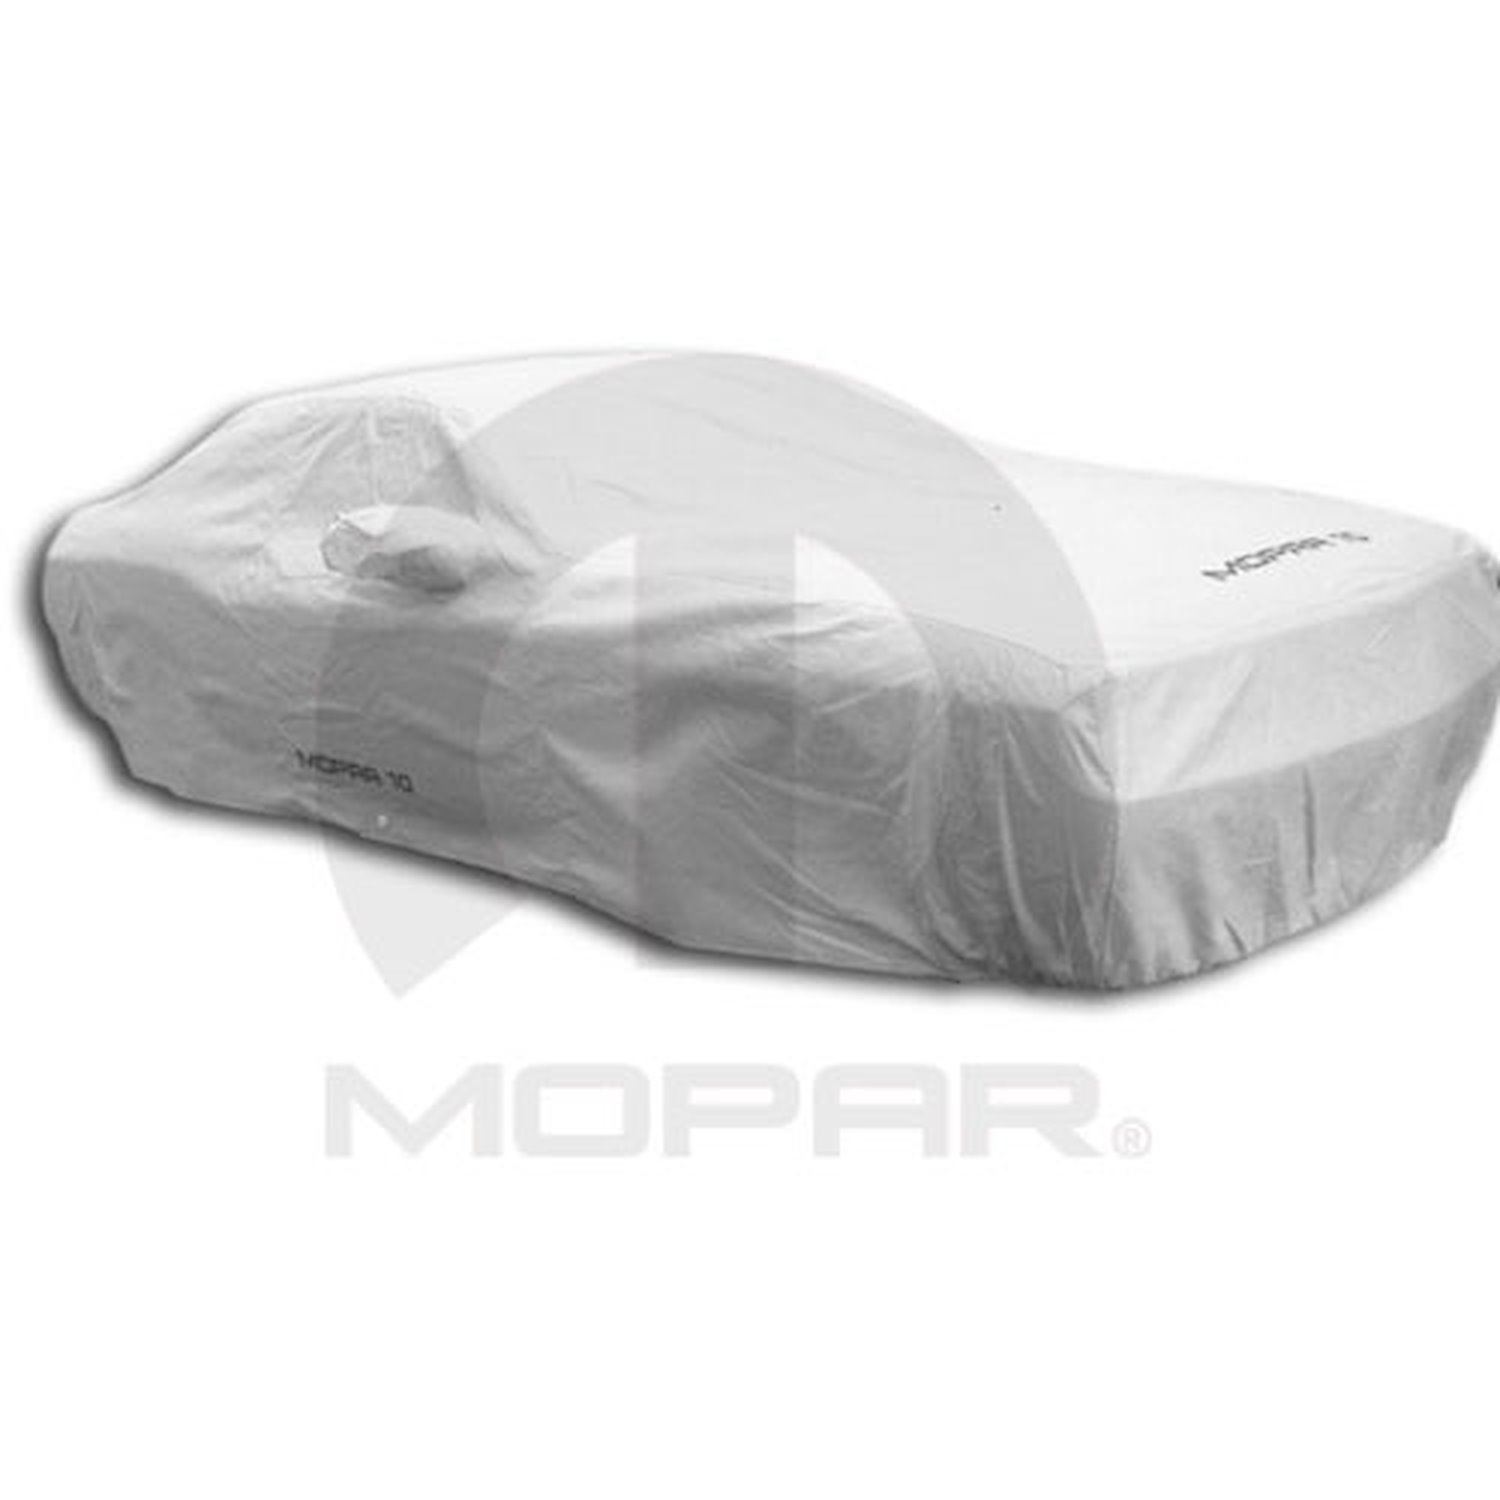 VEHICLE COVER FULL